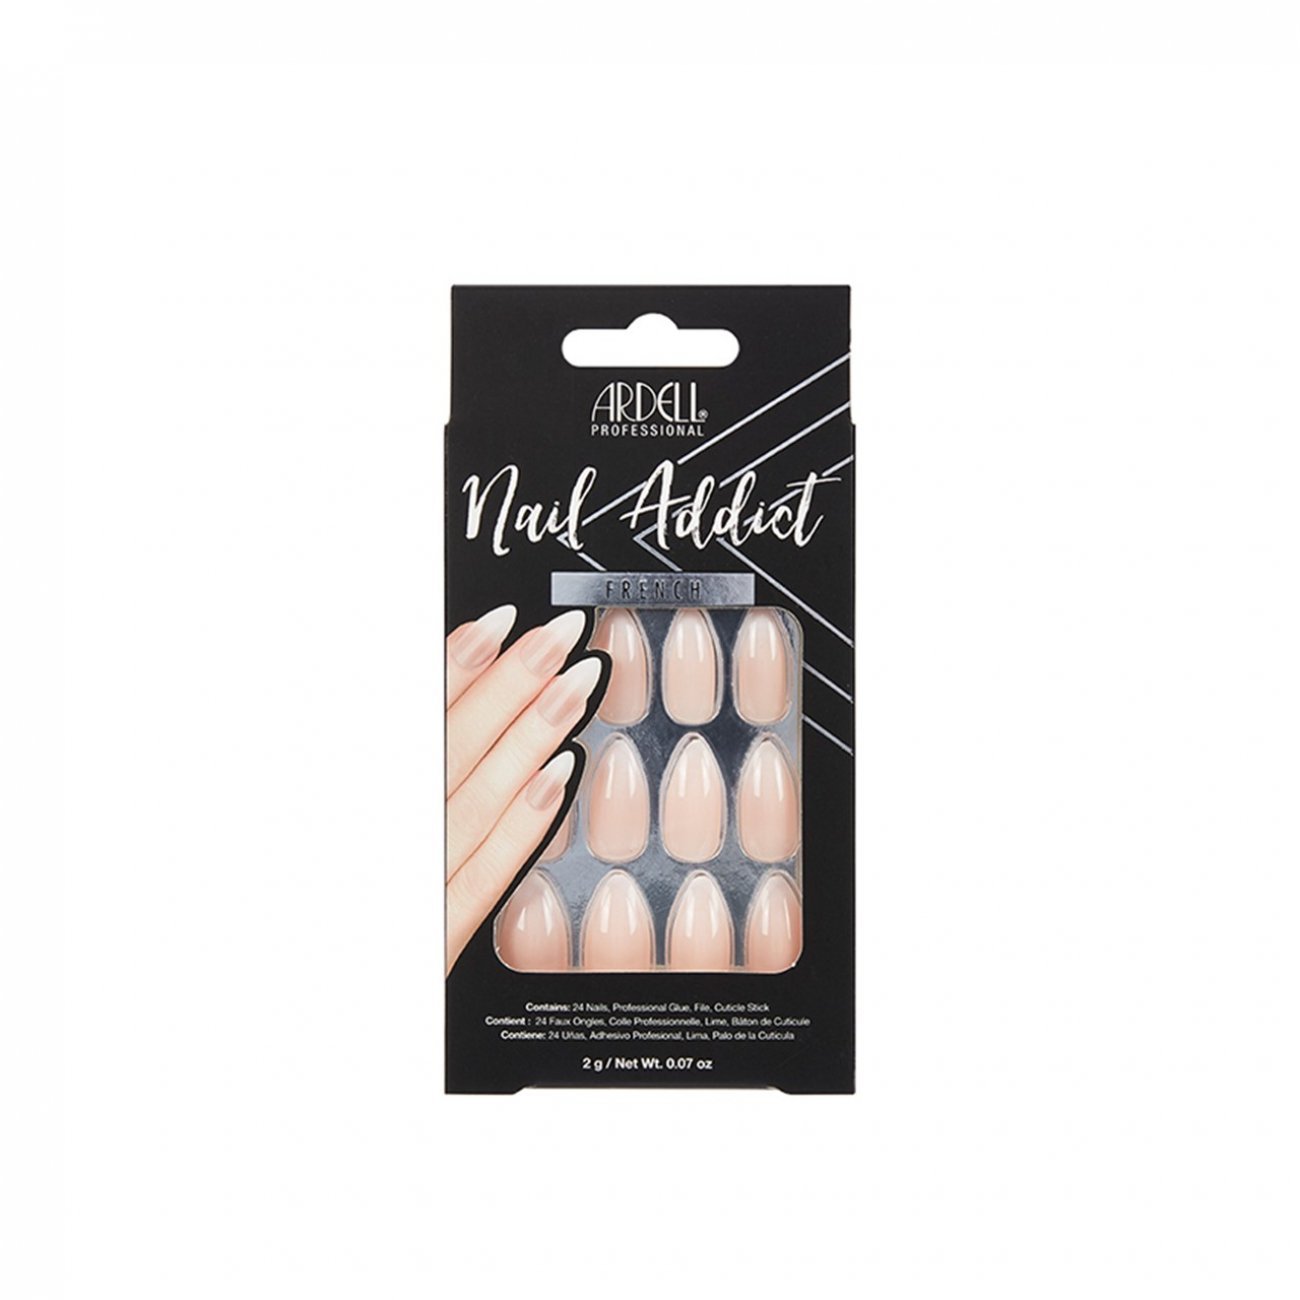 Buy Ardell Nail Addict French Artificial Nails Ombre Fade x24 · Sweden